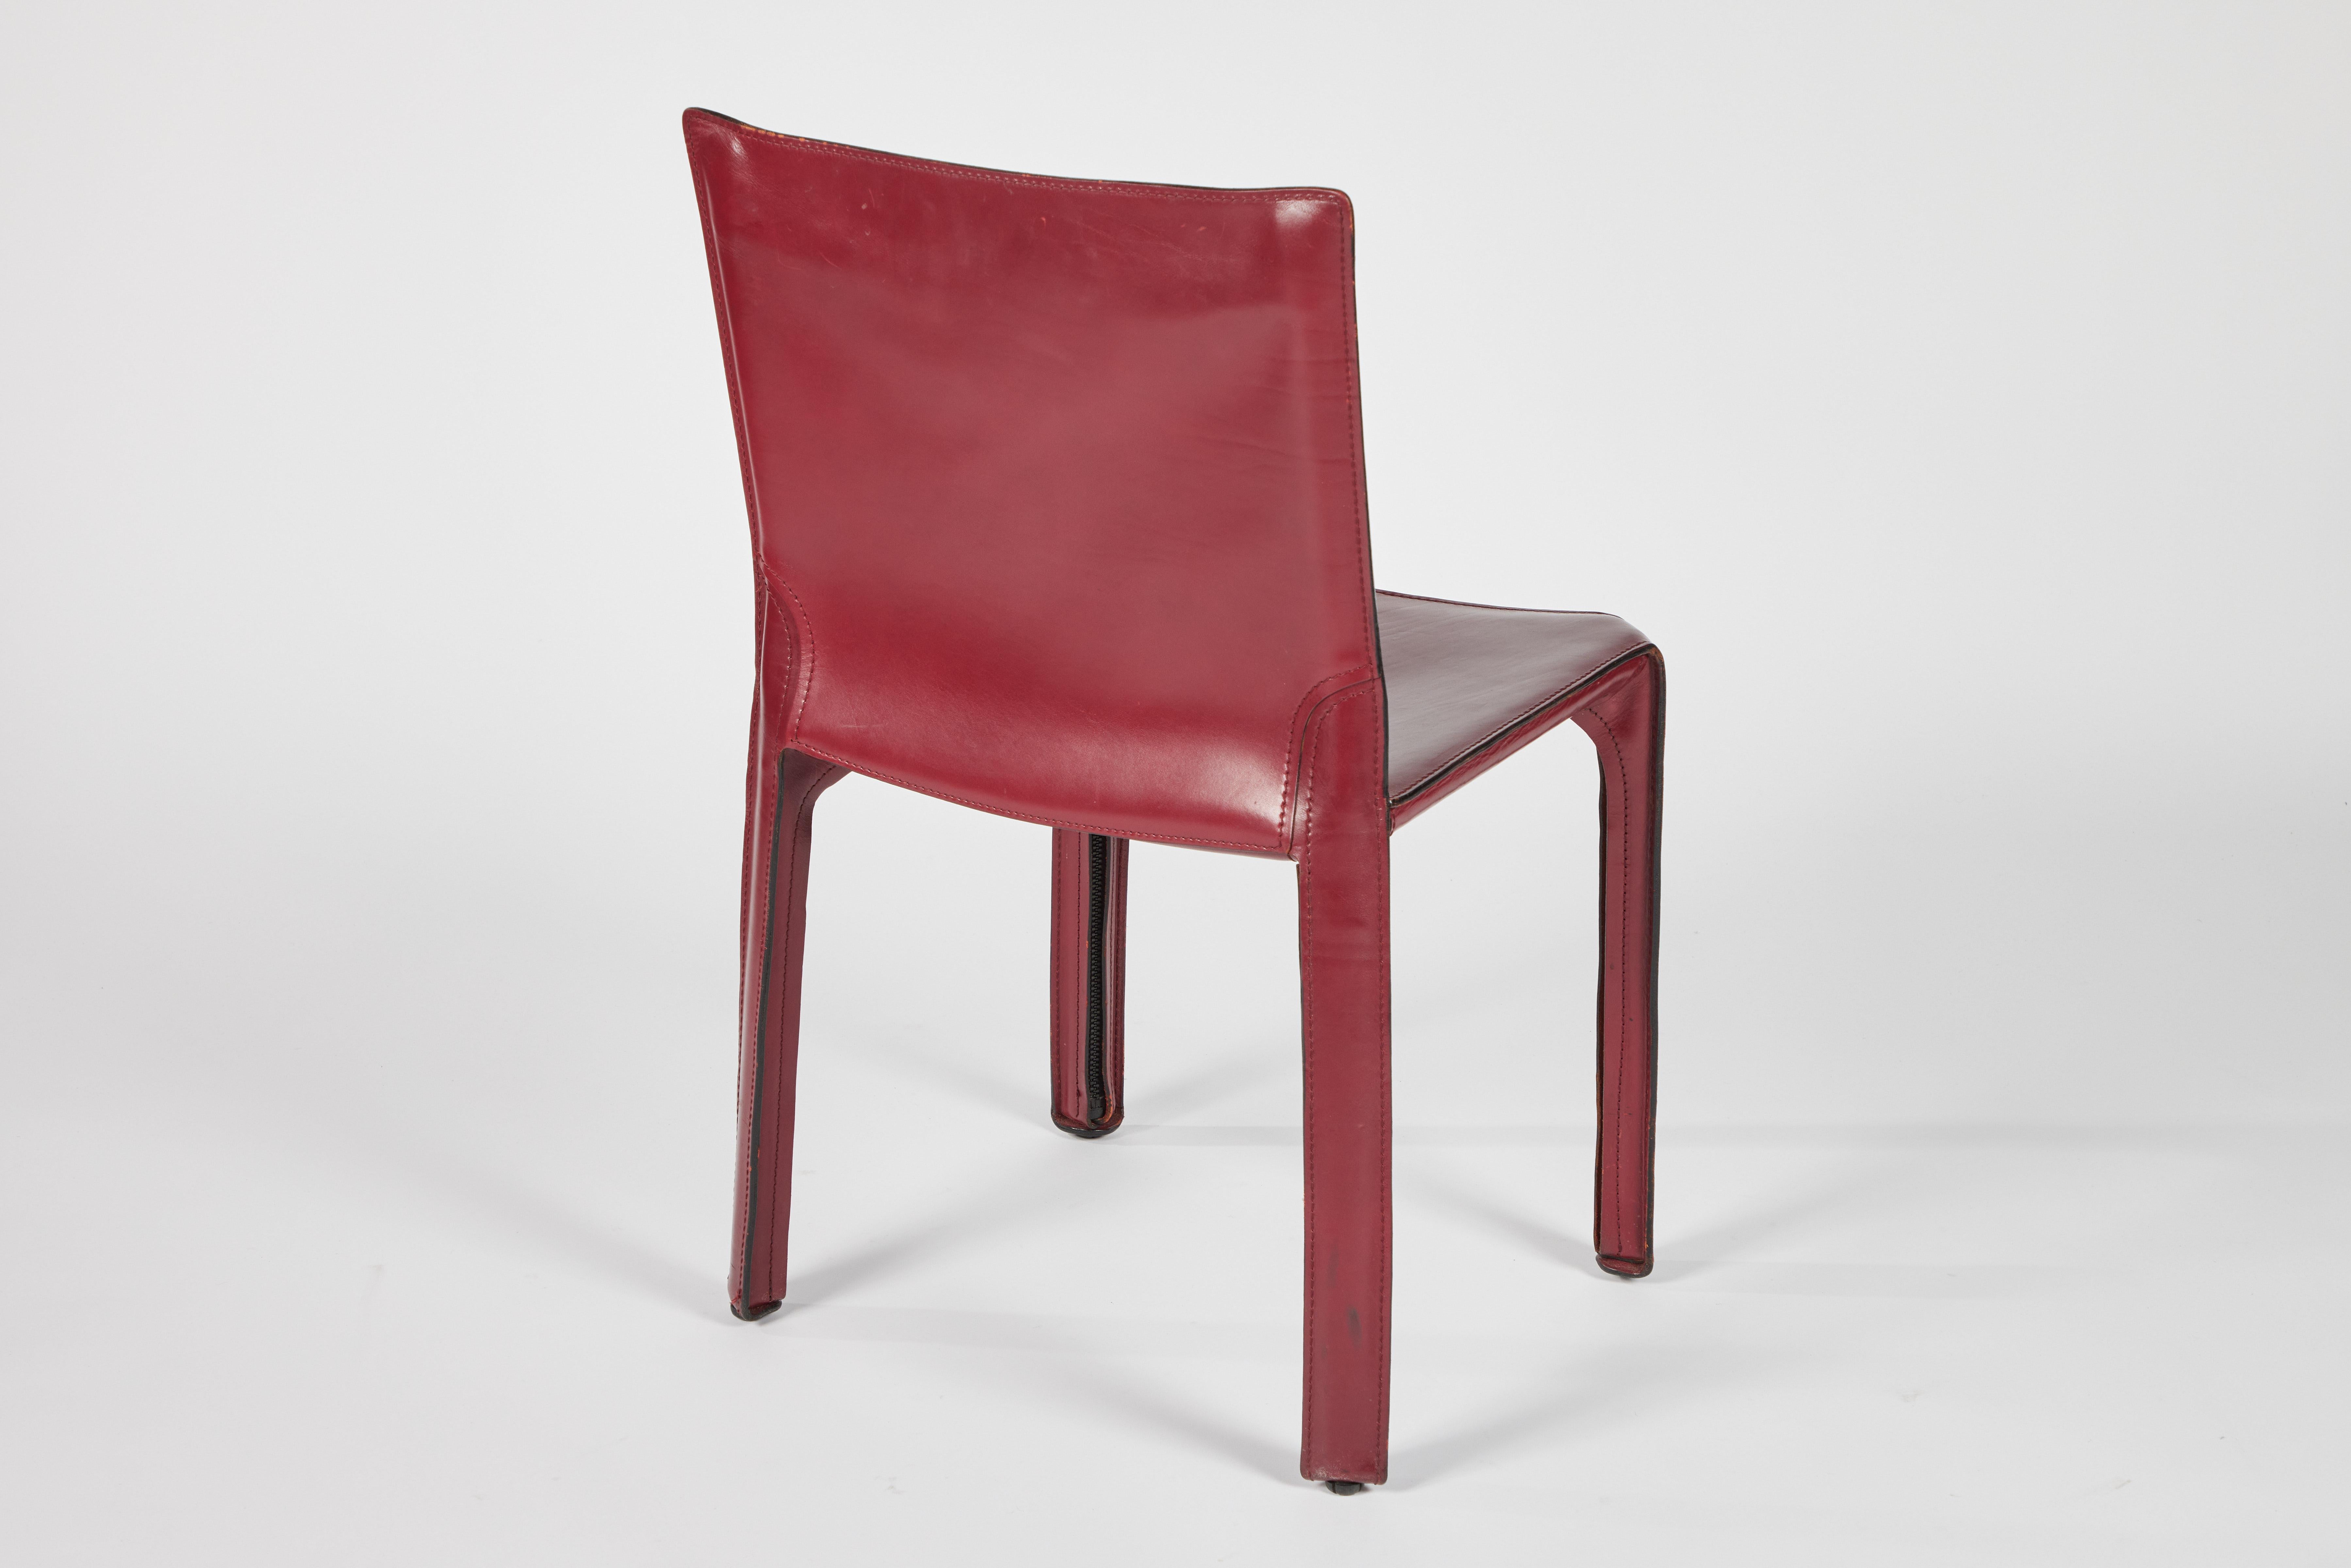 Late 20th Century Set of 10 Burgundy Cab Dining Chairs by Mario Bellini for Cassina, 1977